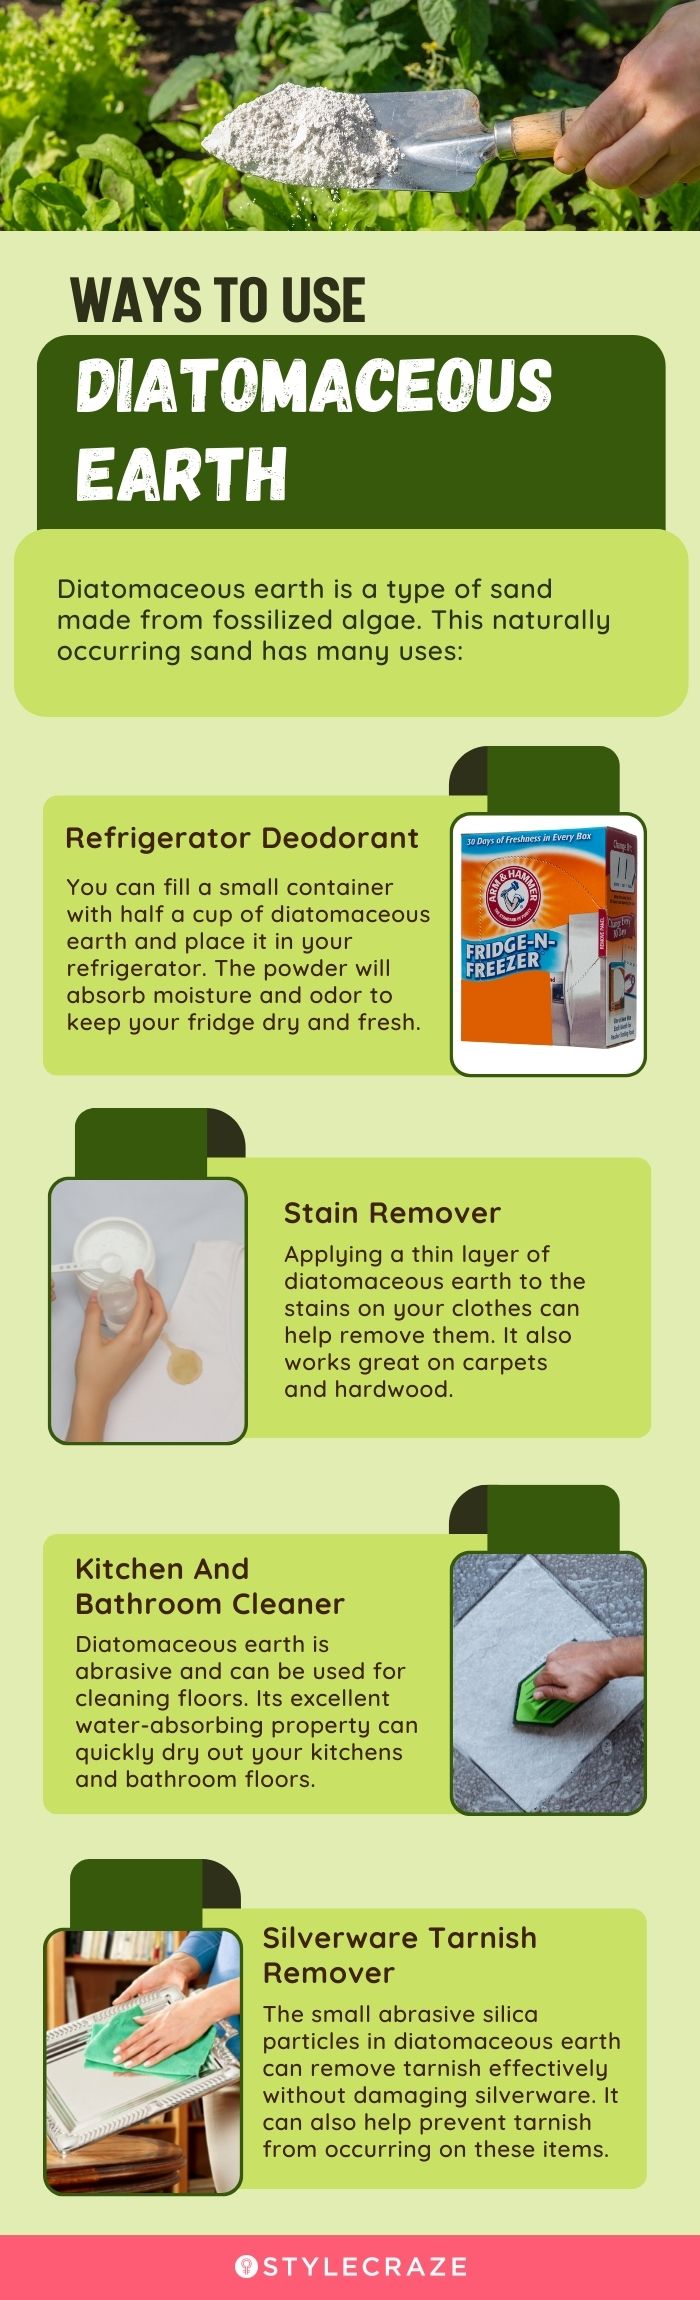 ways to use diatomaceous earth [infographic]